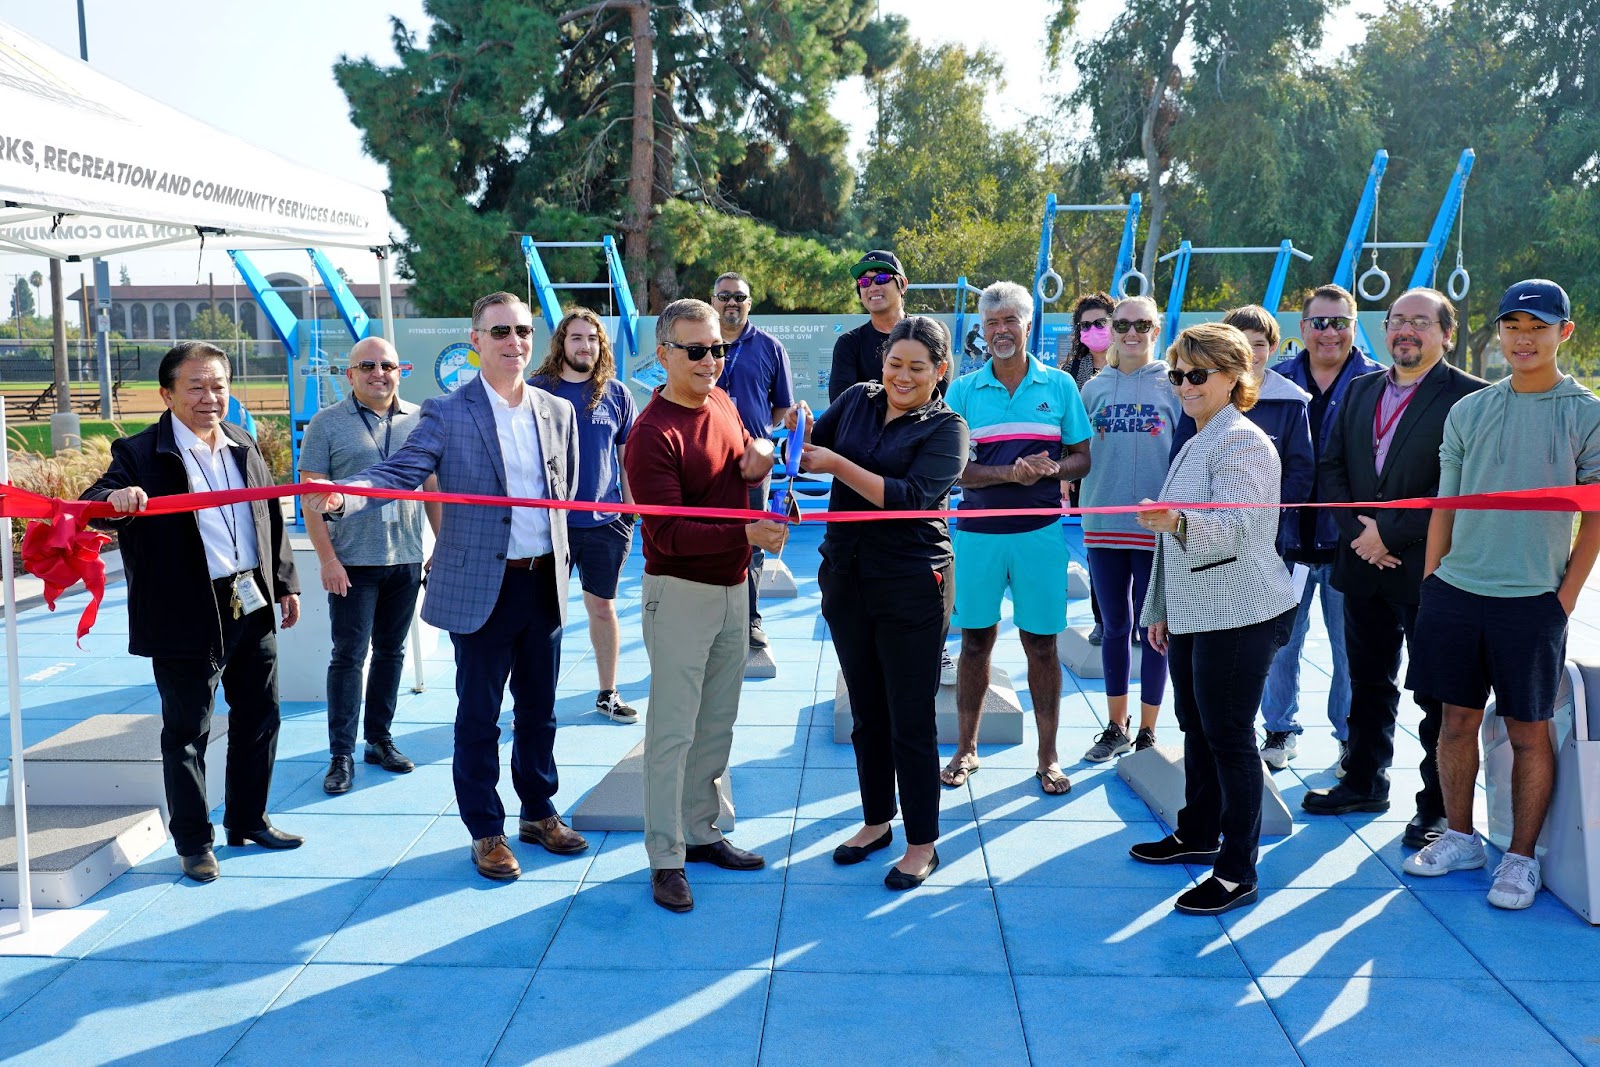 A group of City officials and residents stand at the Cabrillo fitness court as Councilmember Lopez and Mayor Sarmiento get ready to cut the ribbon.